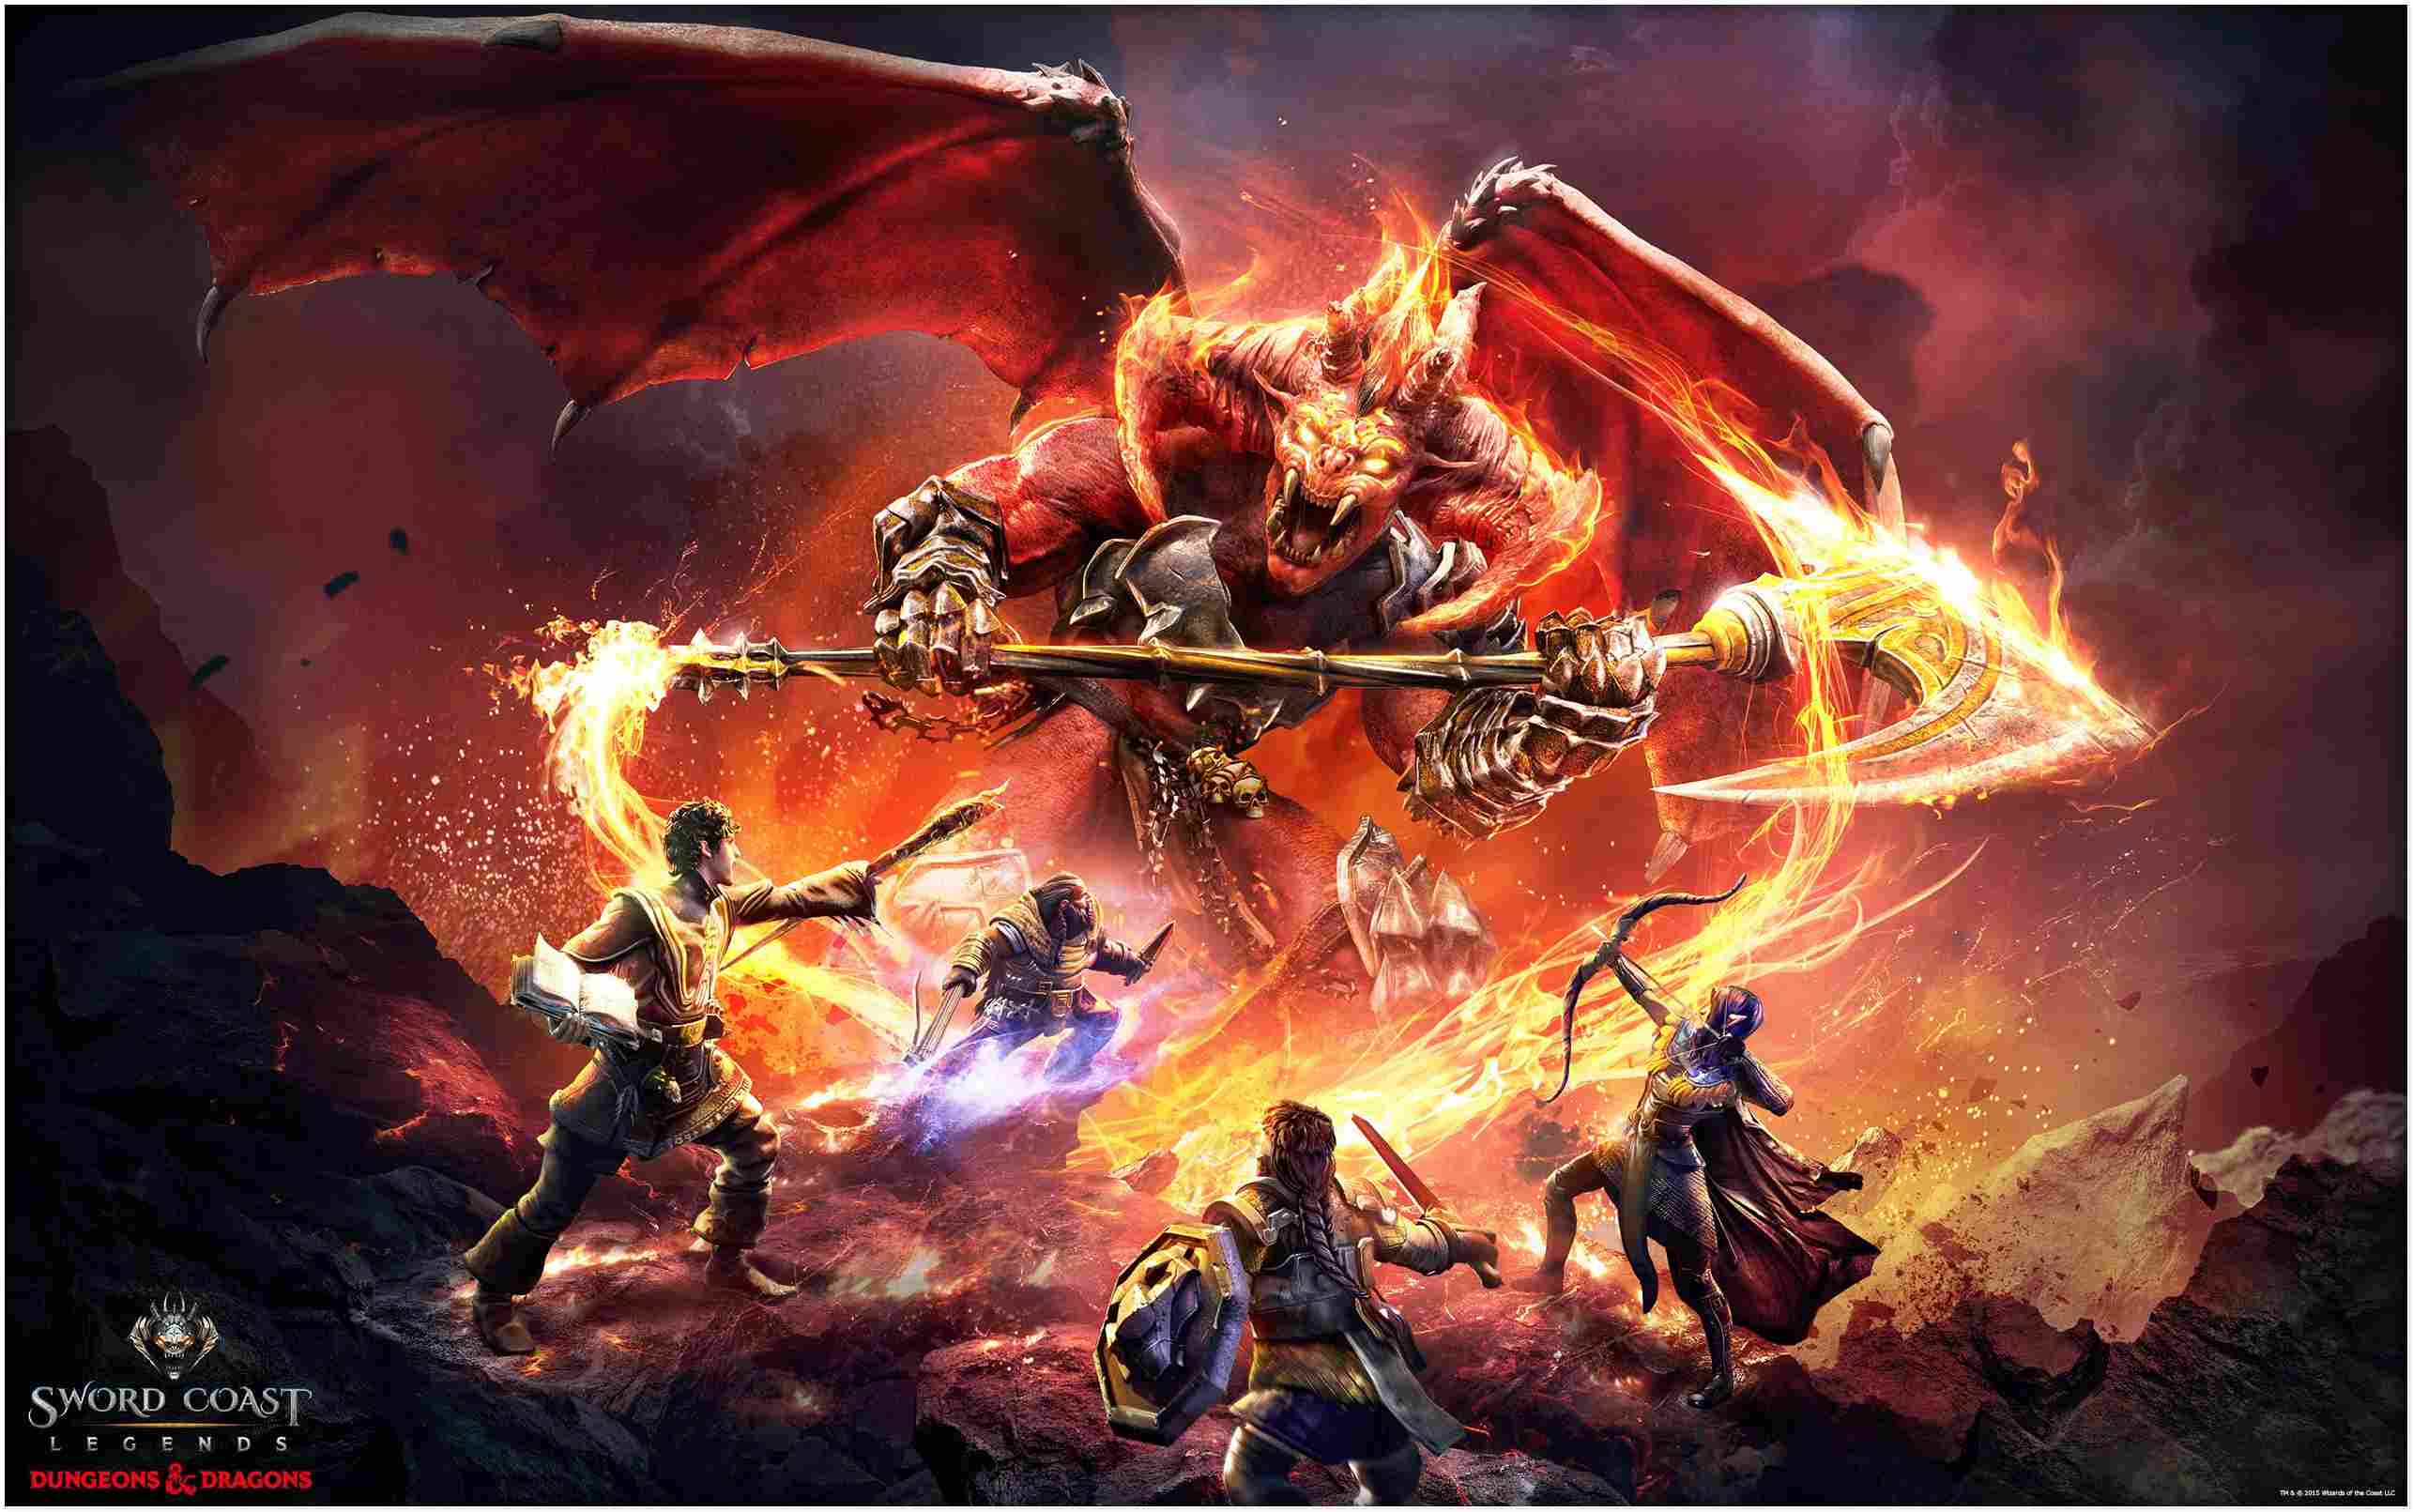 Best 11 dungeons and dragons wallpaper latest Update Wallpaper Wise